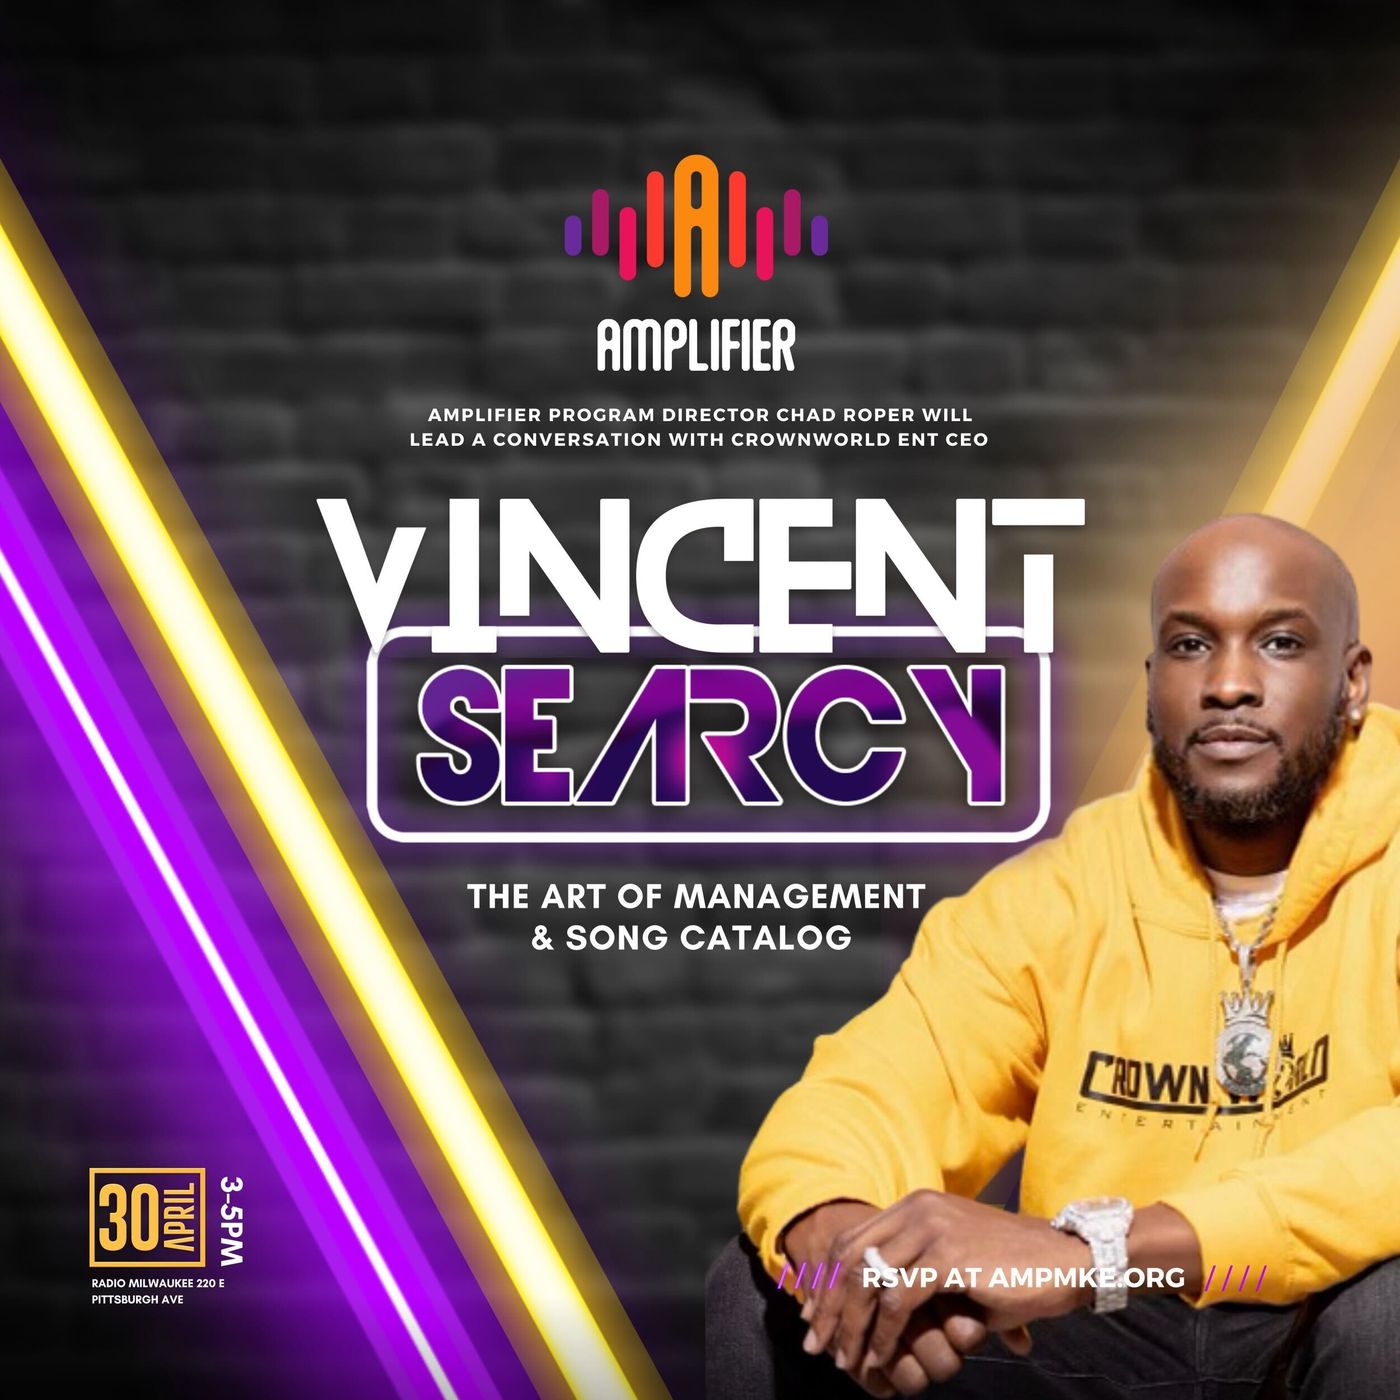 Vincent Searcy – The Art of Management & Song Catalog